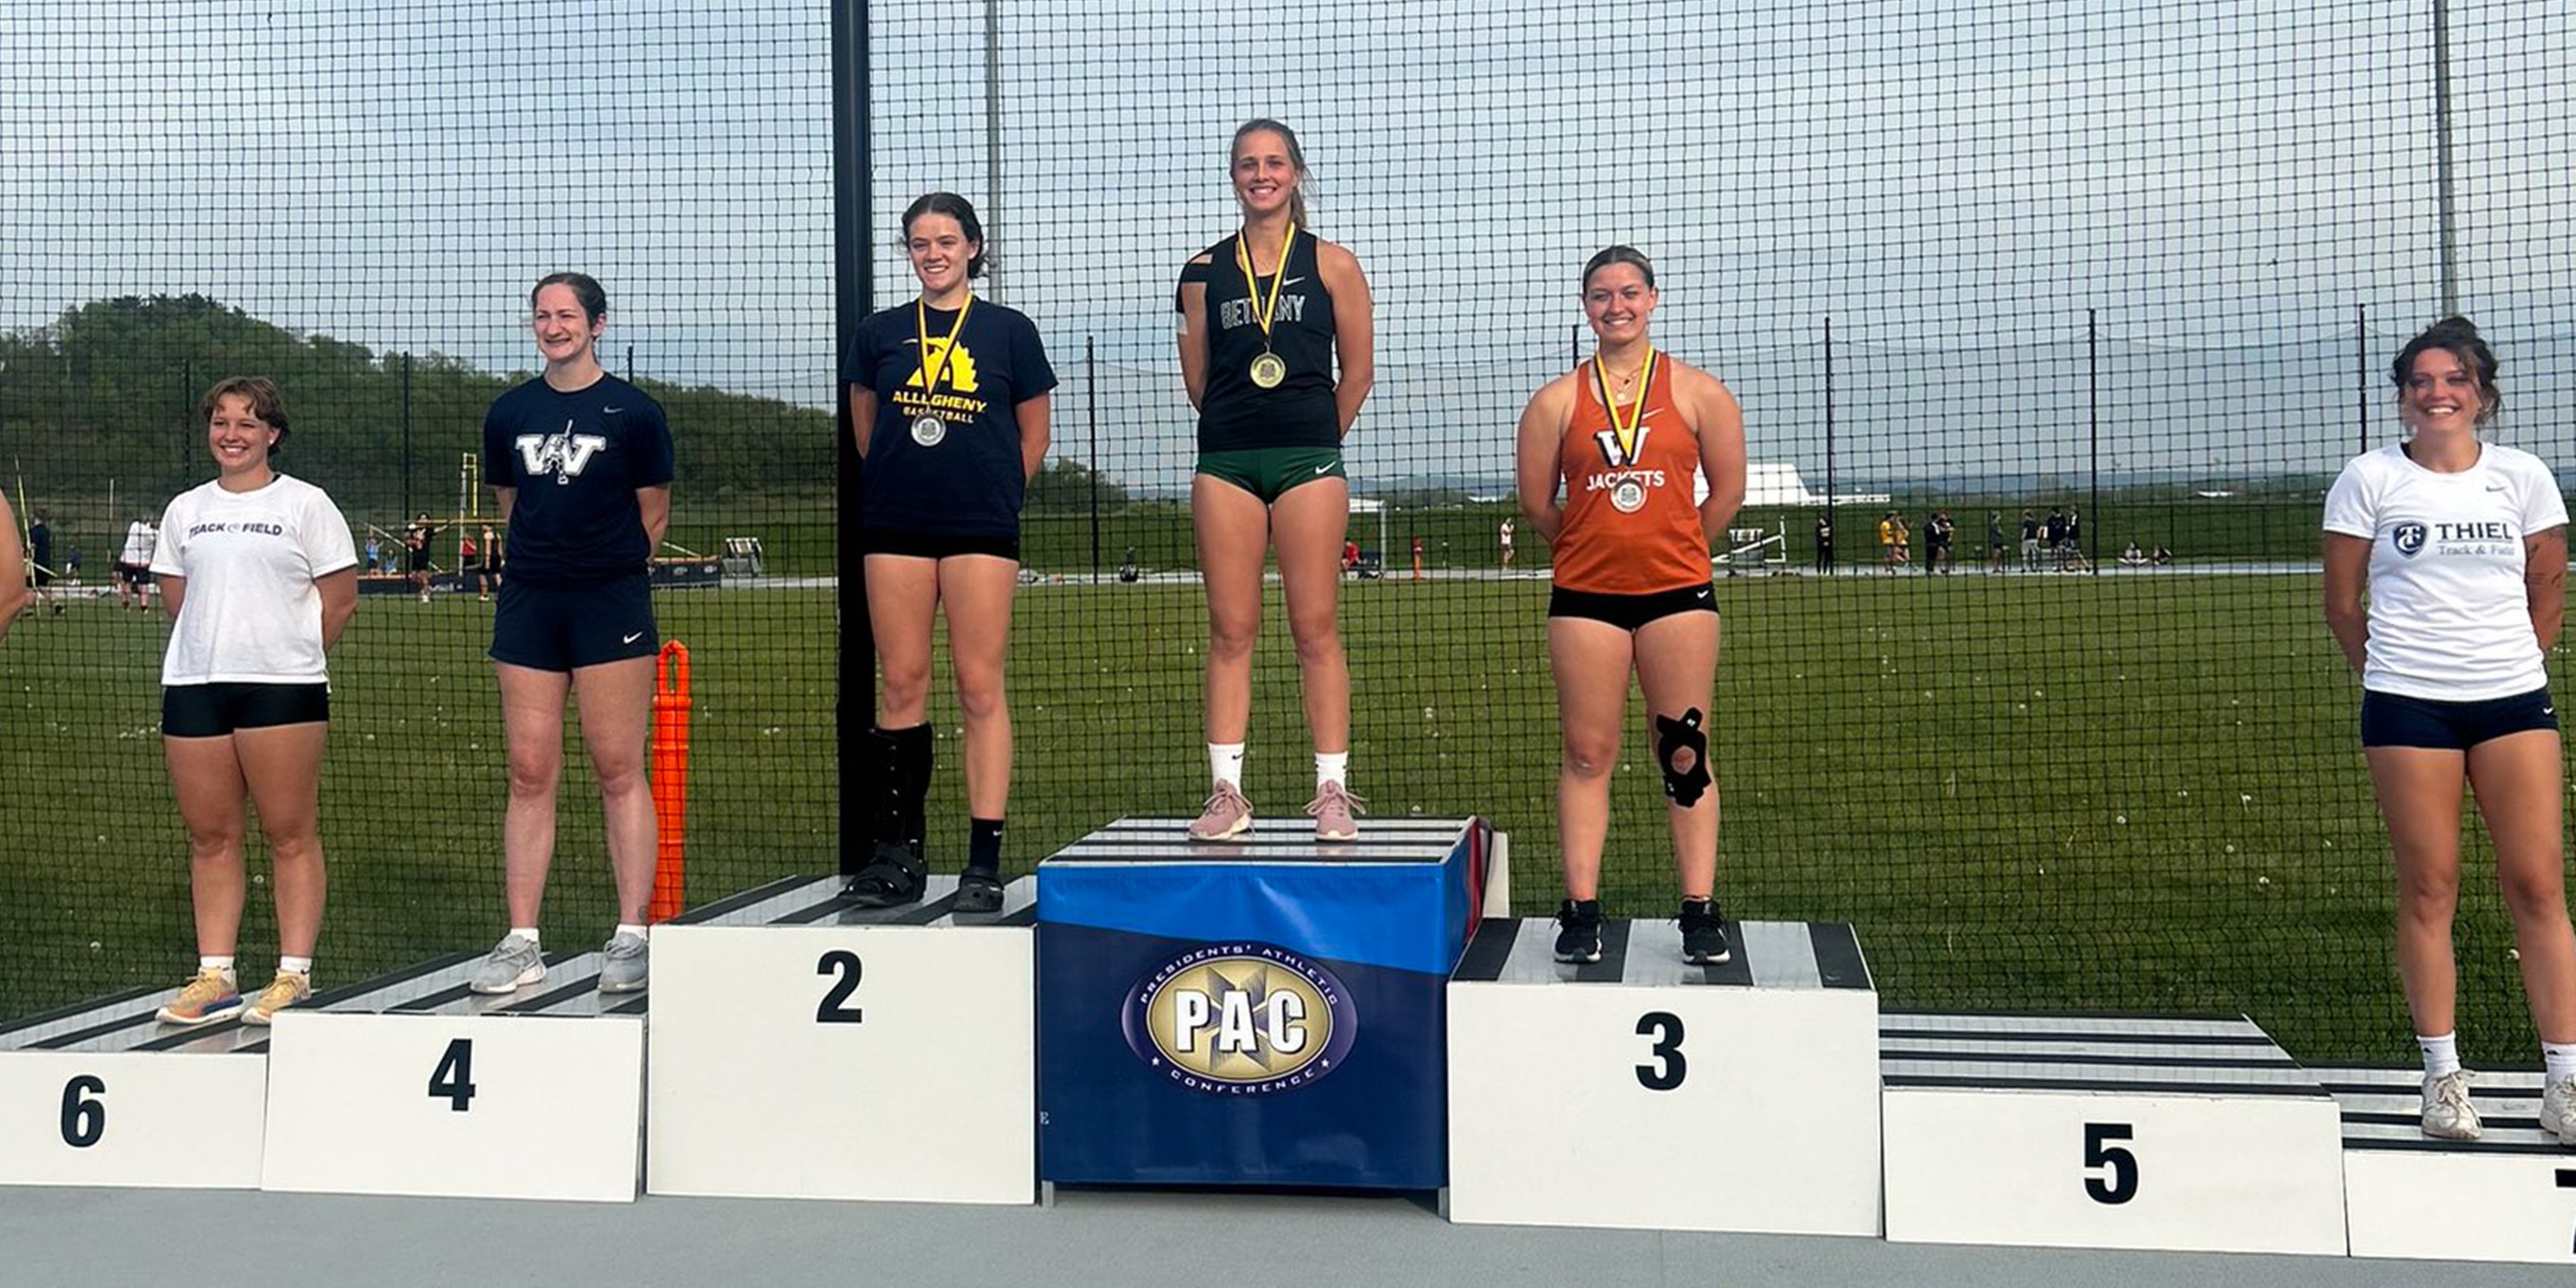 Women's Track and Field: Tice wins PAC javelin title